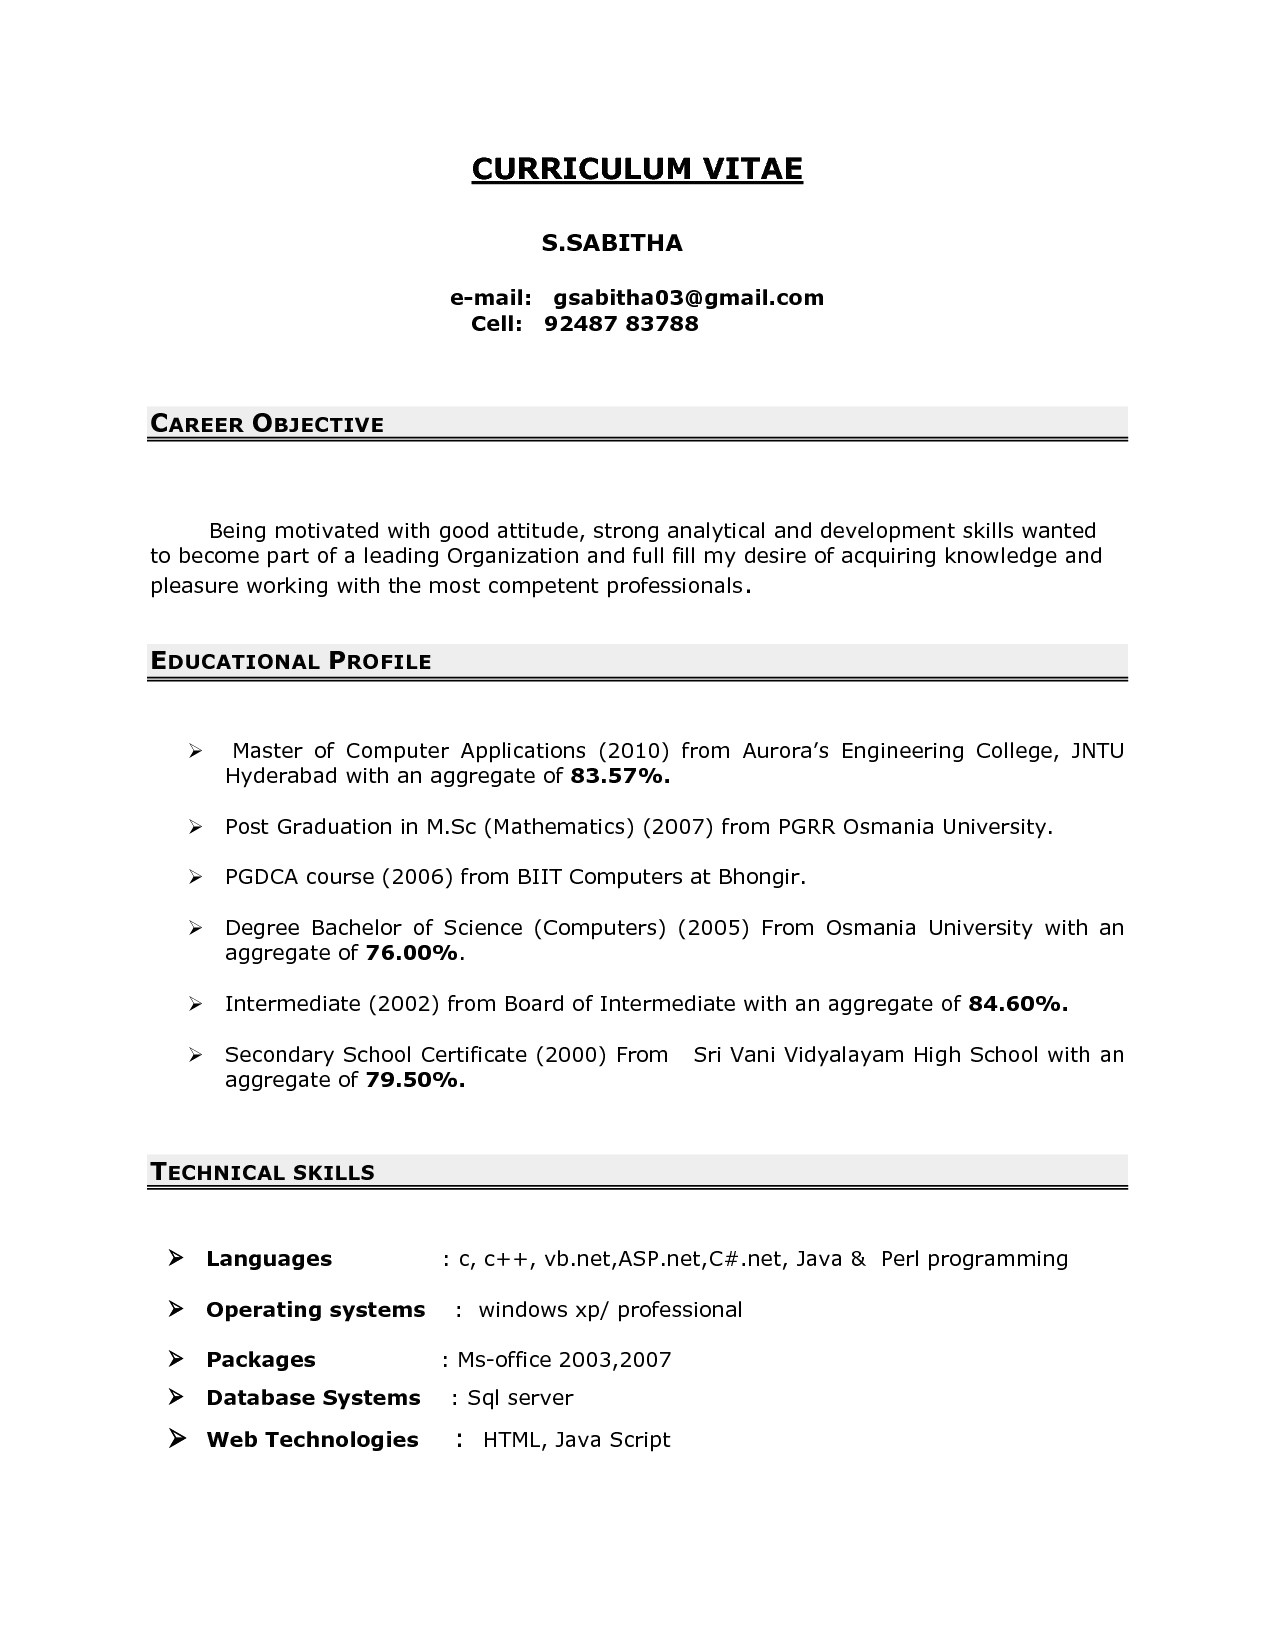 resume summary samples for it professionals